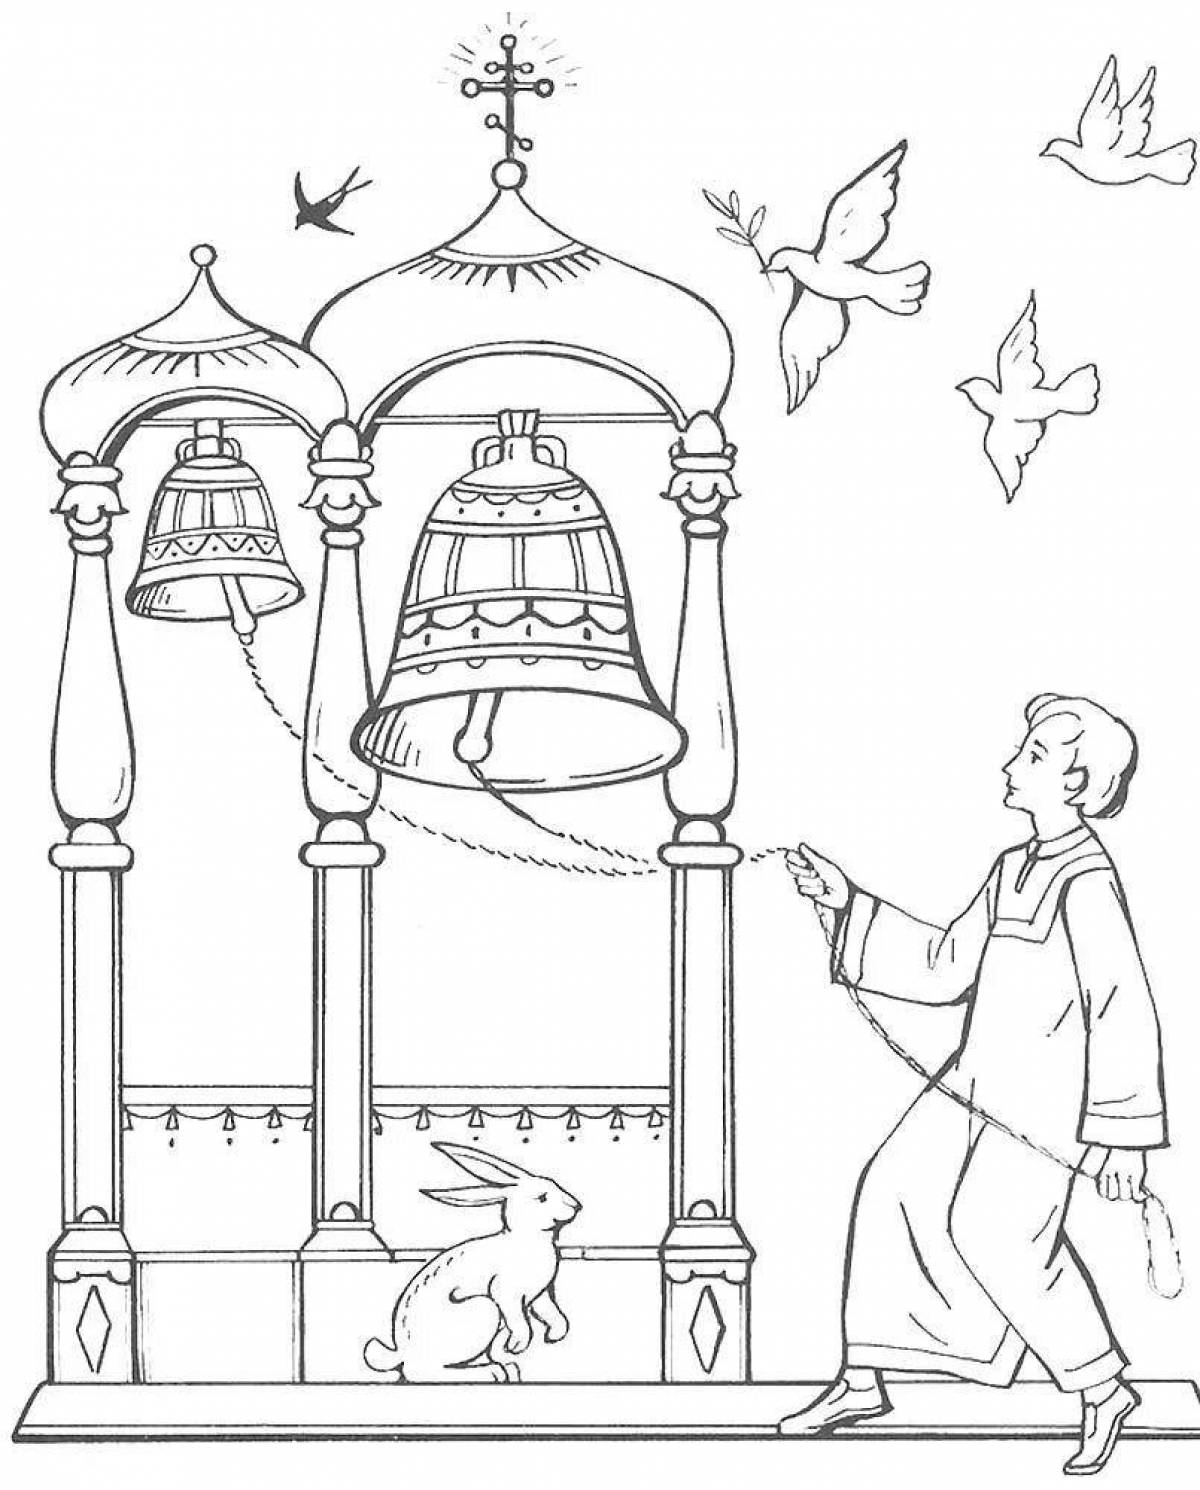 Bright orthodox coloring book for children